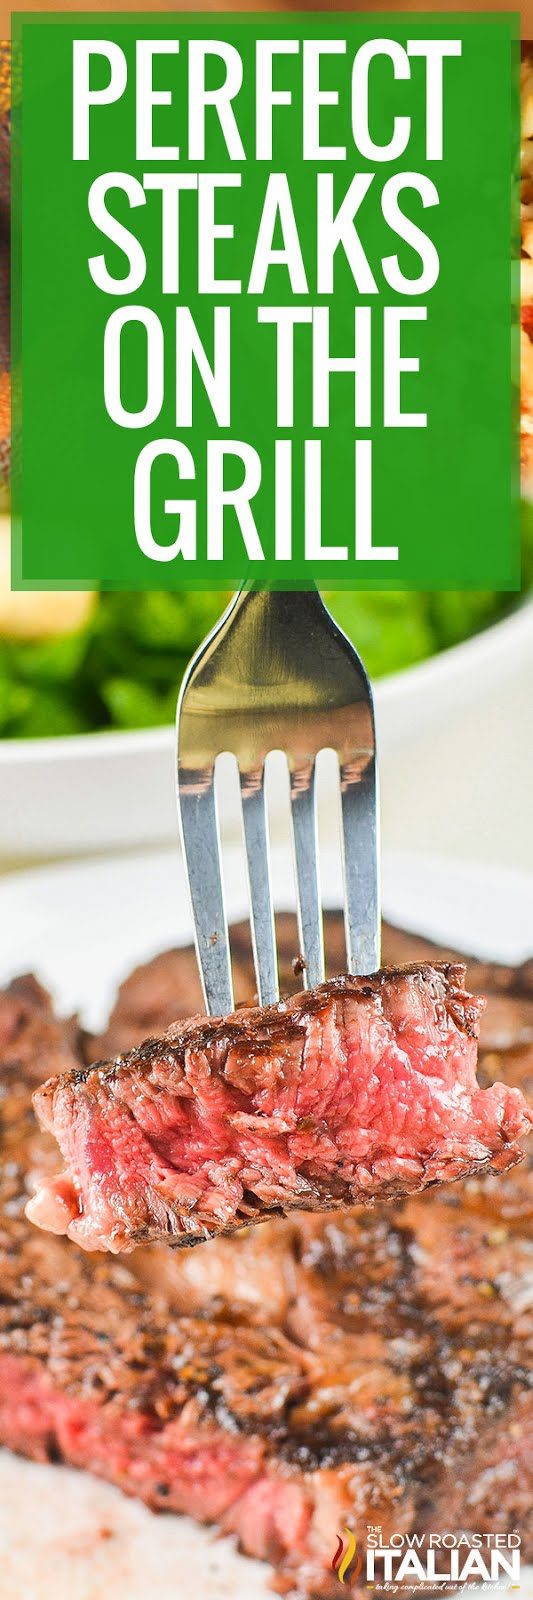 perfect-steaks-on-the-grill-pin-7732039